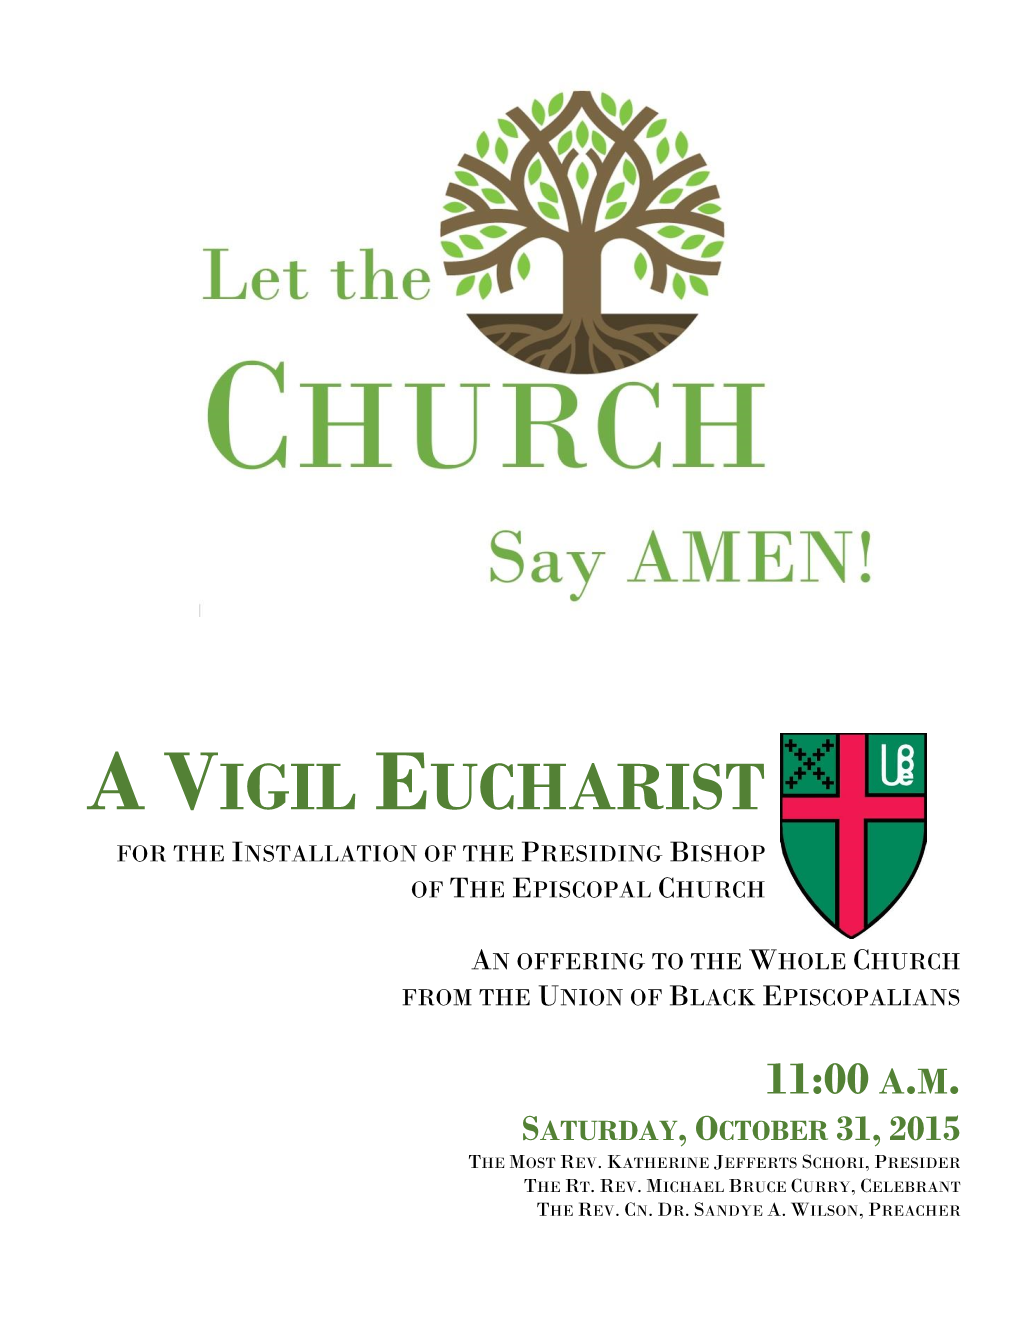 A Vigil Eucharist for the Installation of the Presiding Bishop of the Episcopal Church